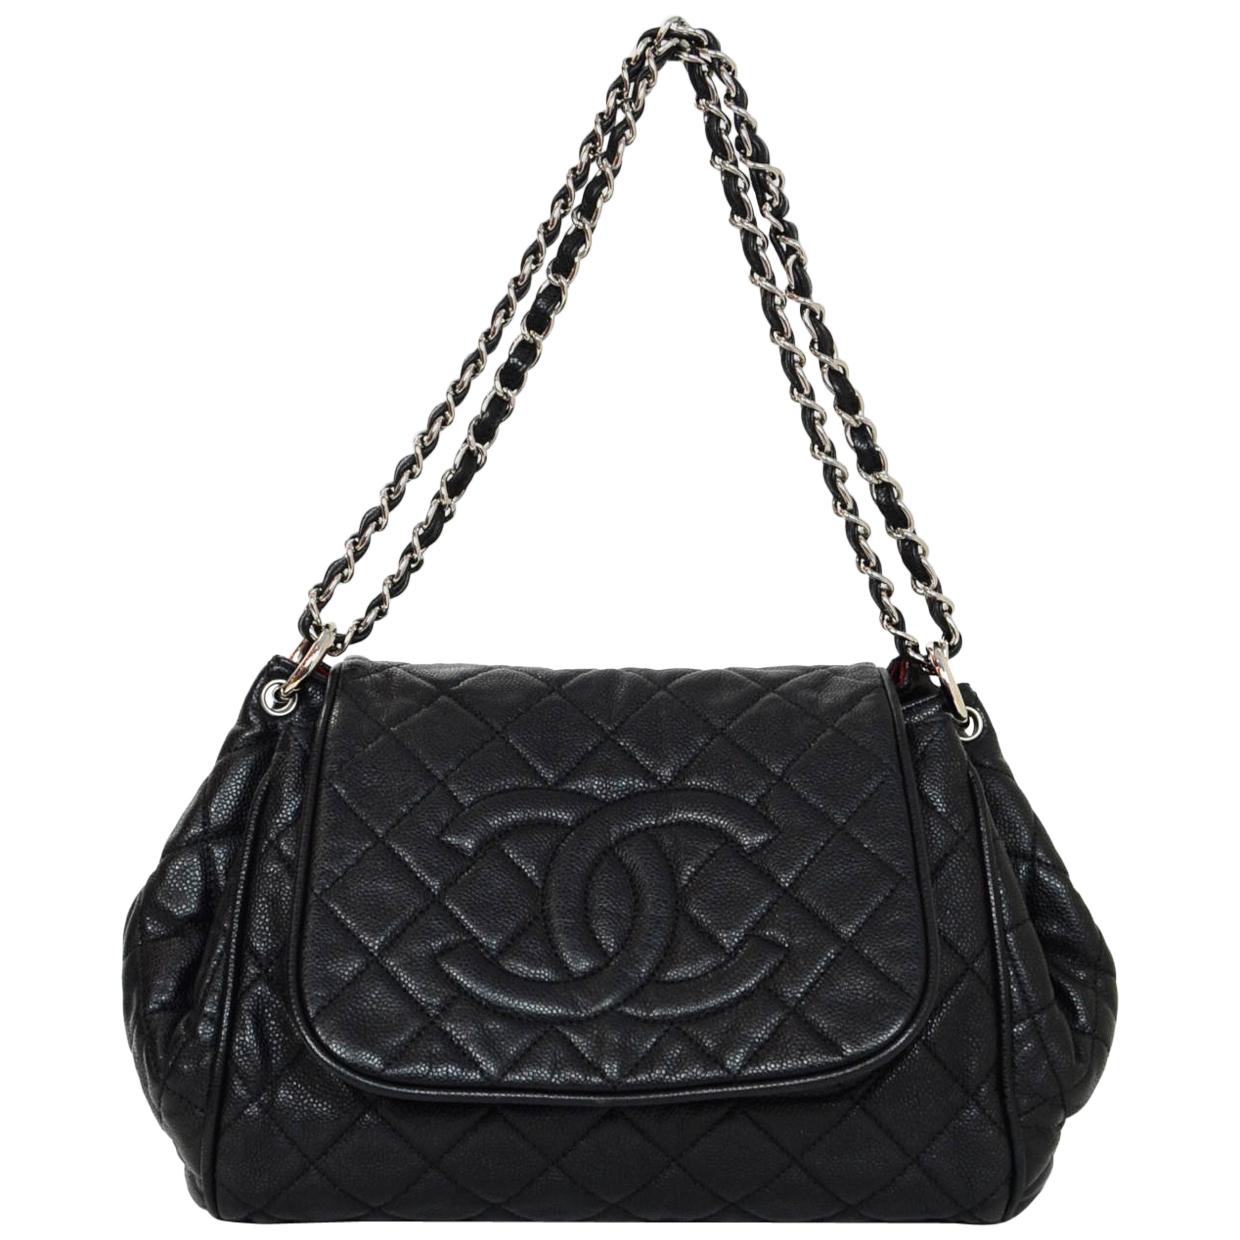 Chanel Black Quilted Caviar Leather Timeless CC Accordion Flap Bag